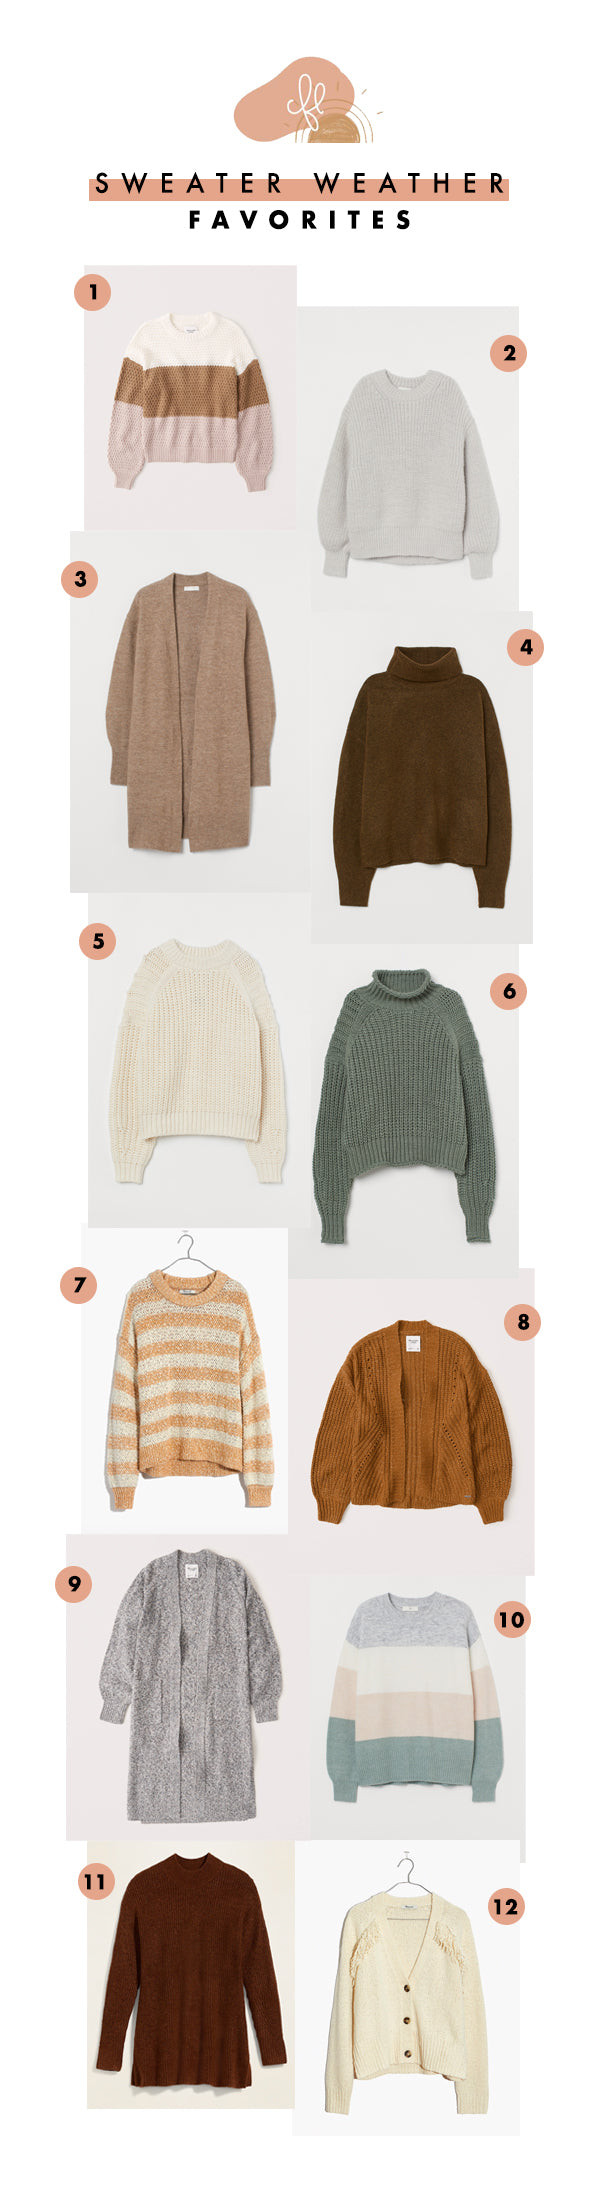 Sweater Weather Favorites